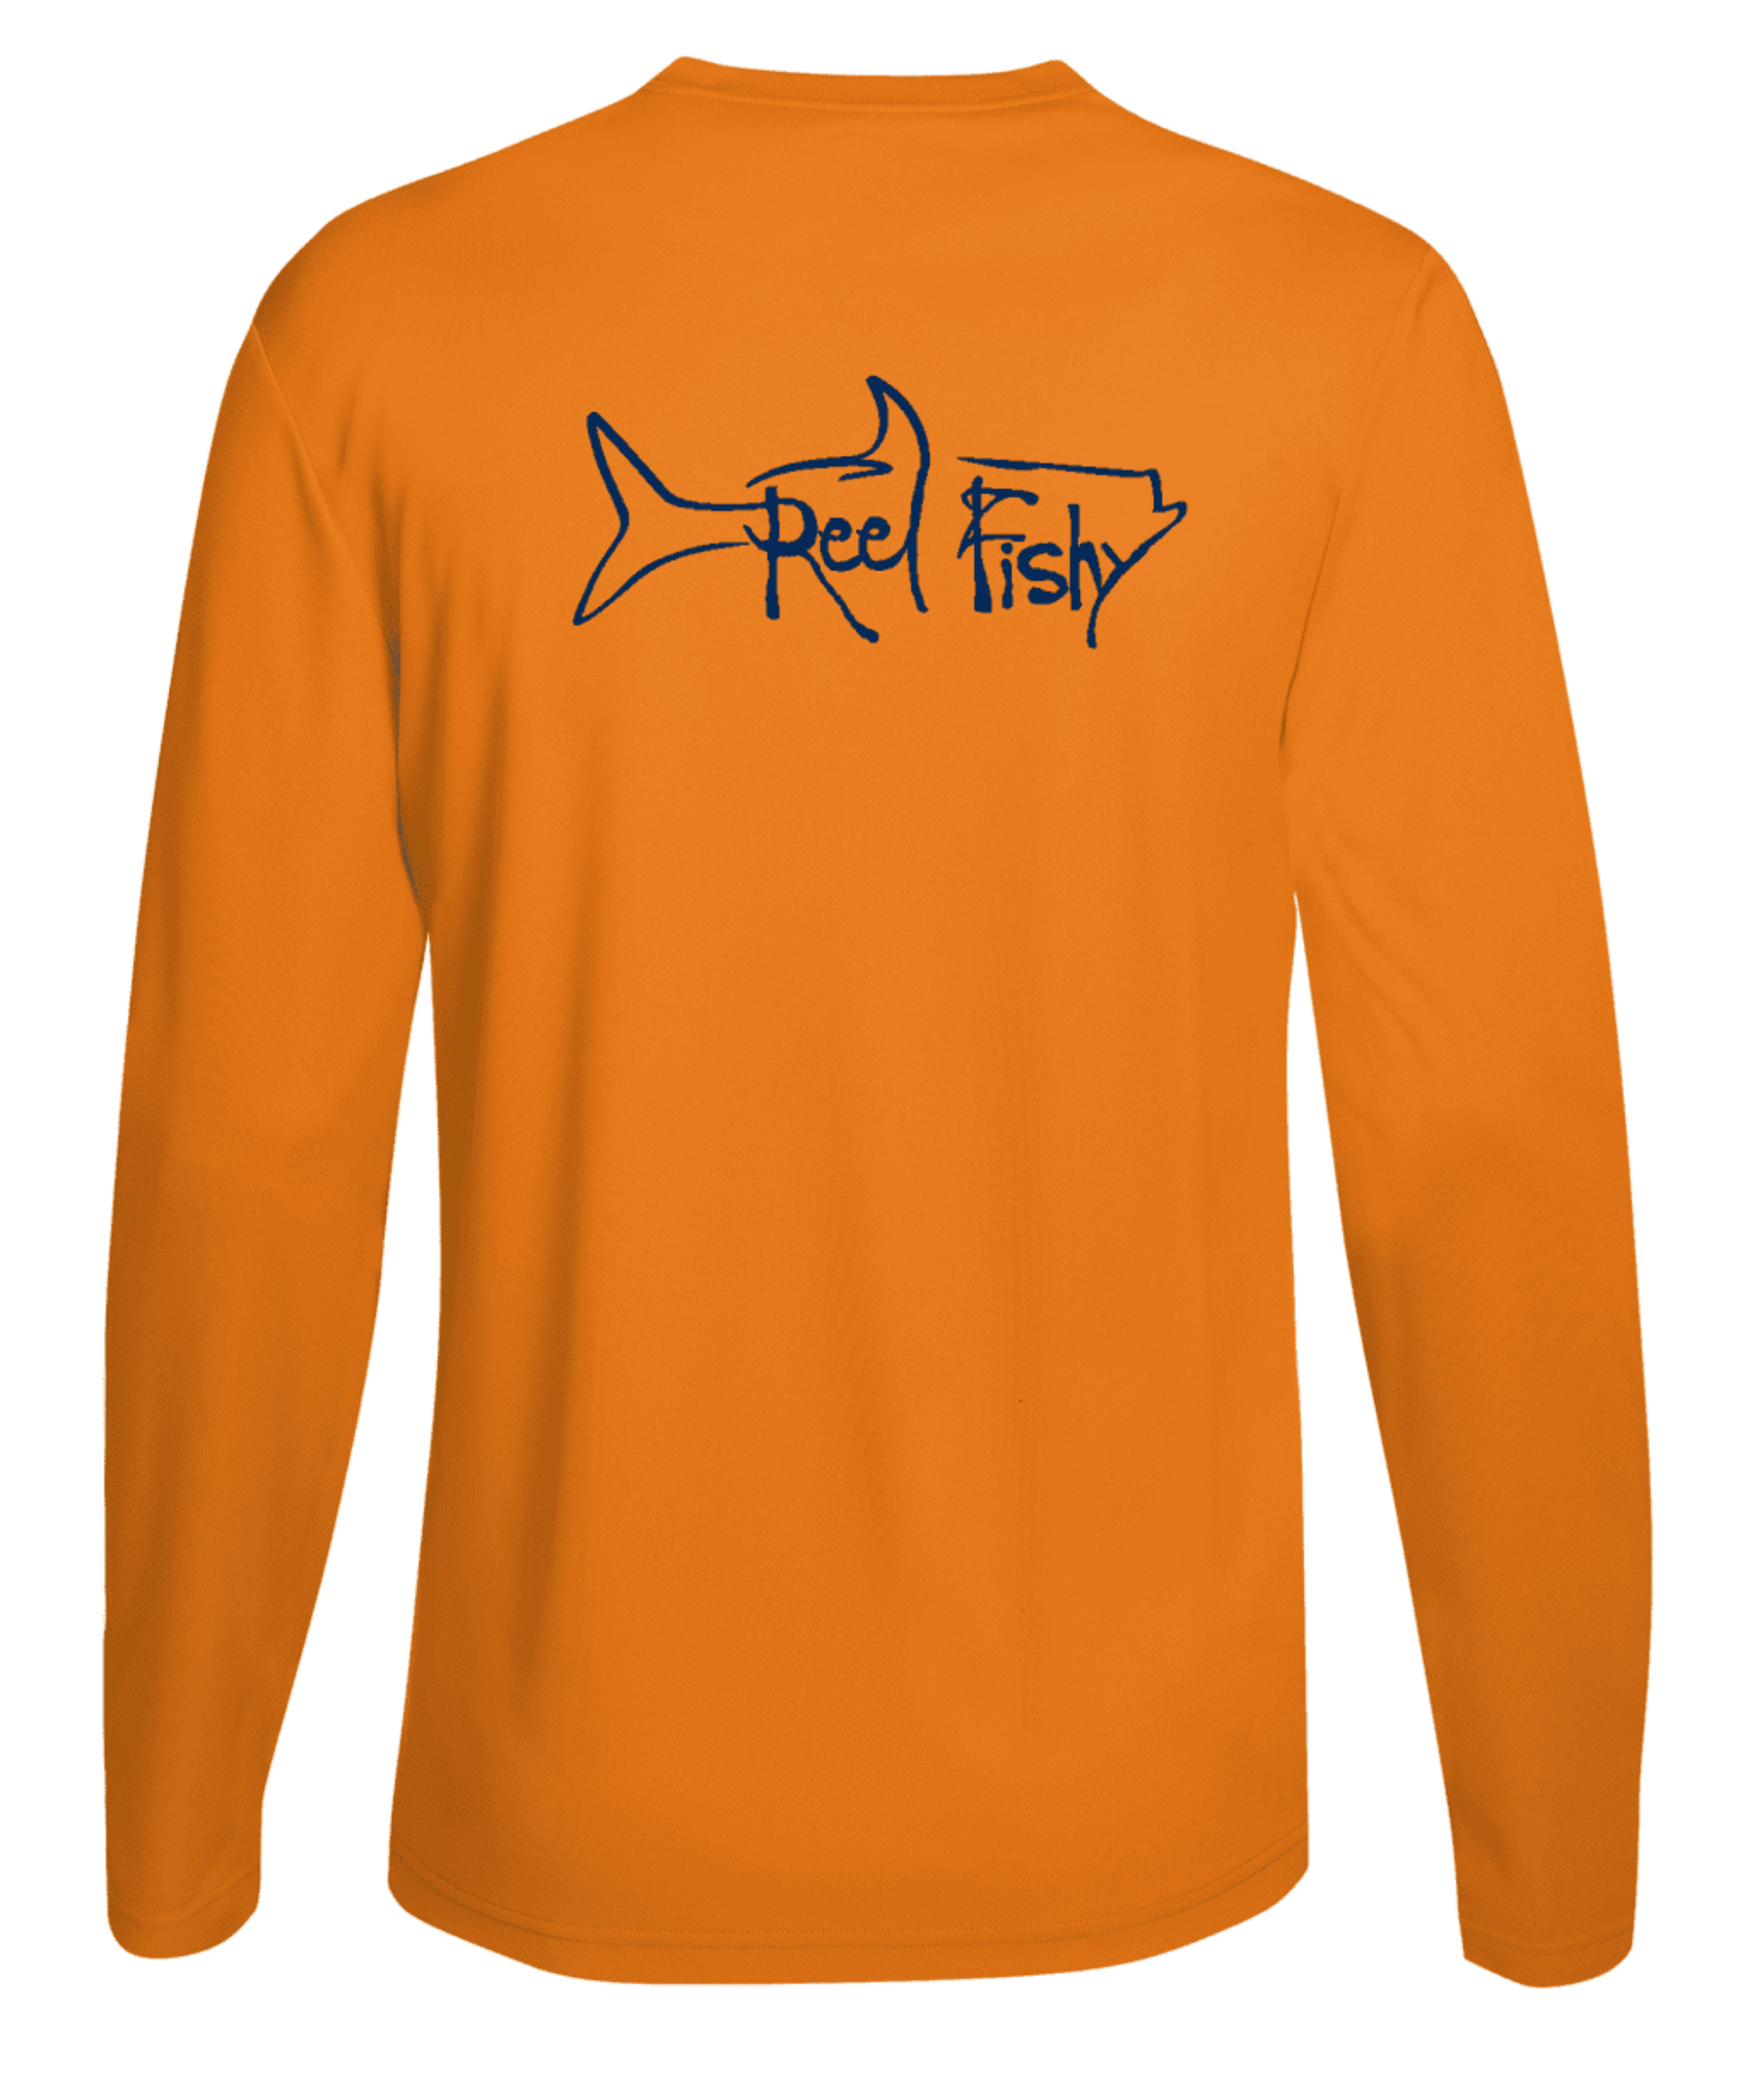 Performance Dry-Fit Tarpon Fishing long sleeve shirts with Sun Protection by Reel Fishy in Neon Orange